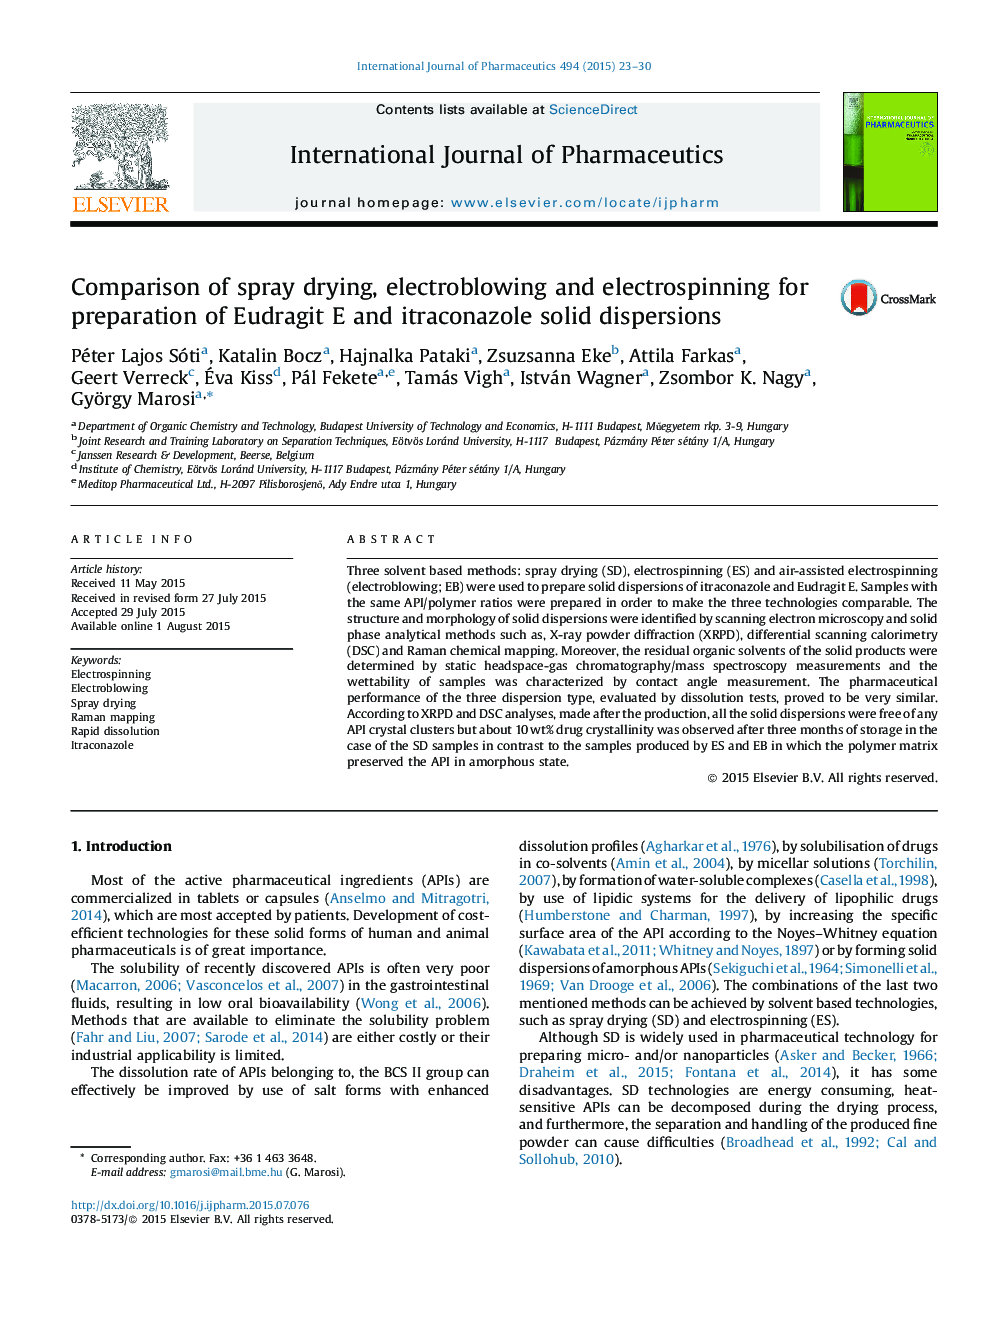 Comparison of spray drying, electroblowing and electrospinning for preparation of Eudragit E and itraconazole solid dispersions